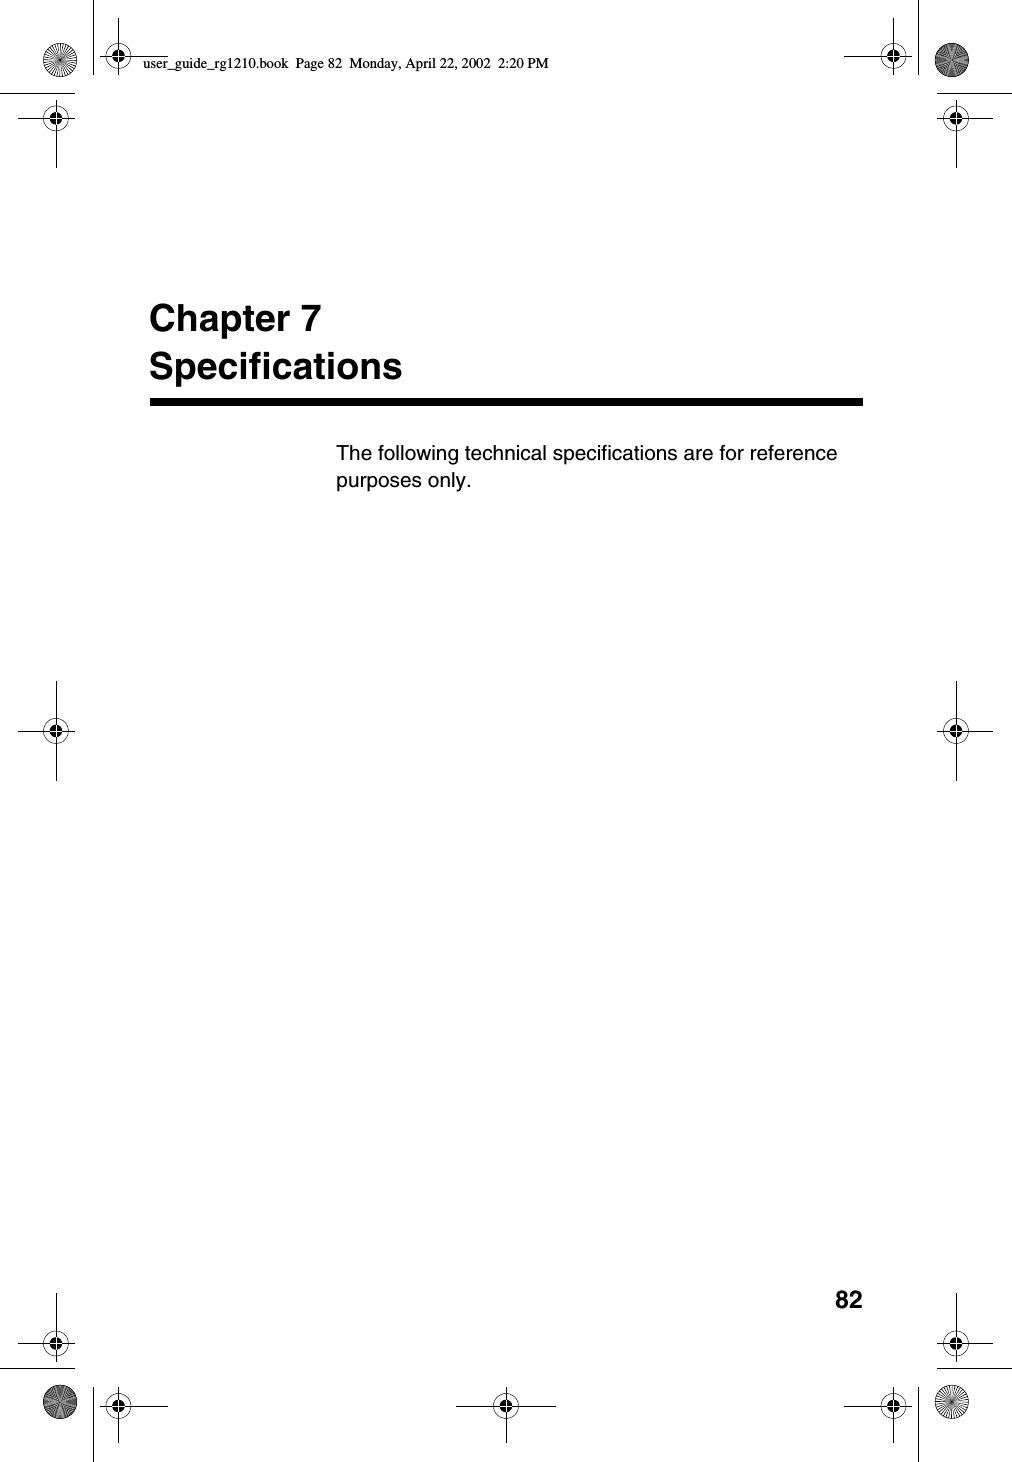 82Chapter 7SpecificationsThe following technical specifications are for referencepurposes only.user_guide_rg1210.book Page 82 Monday, April 22, 2002 2:20 PM